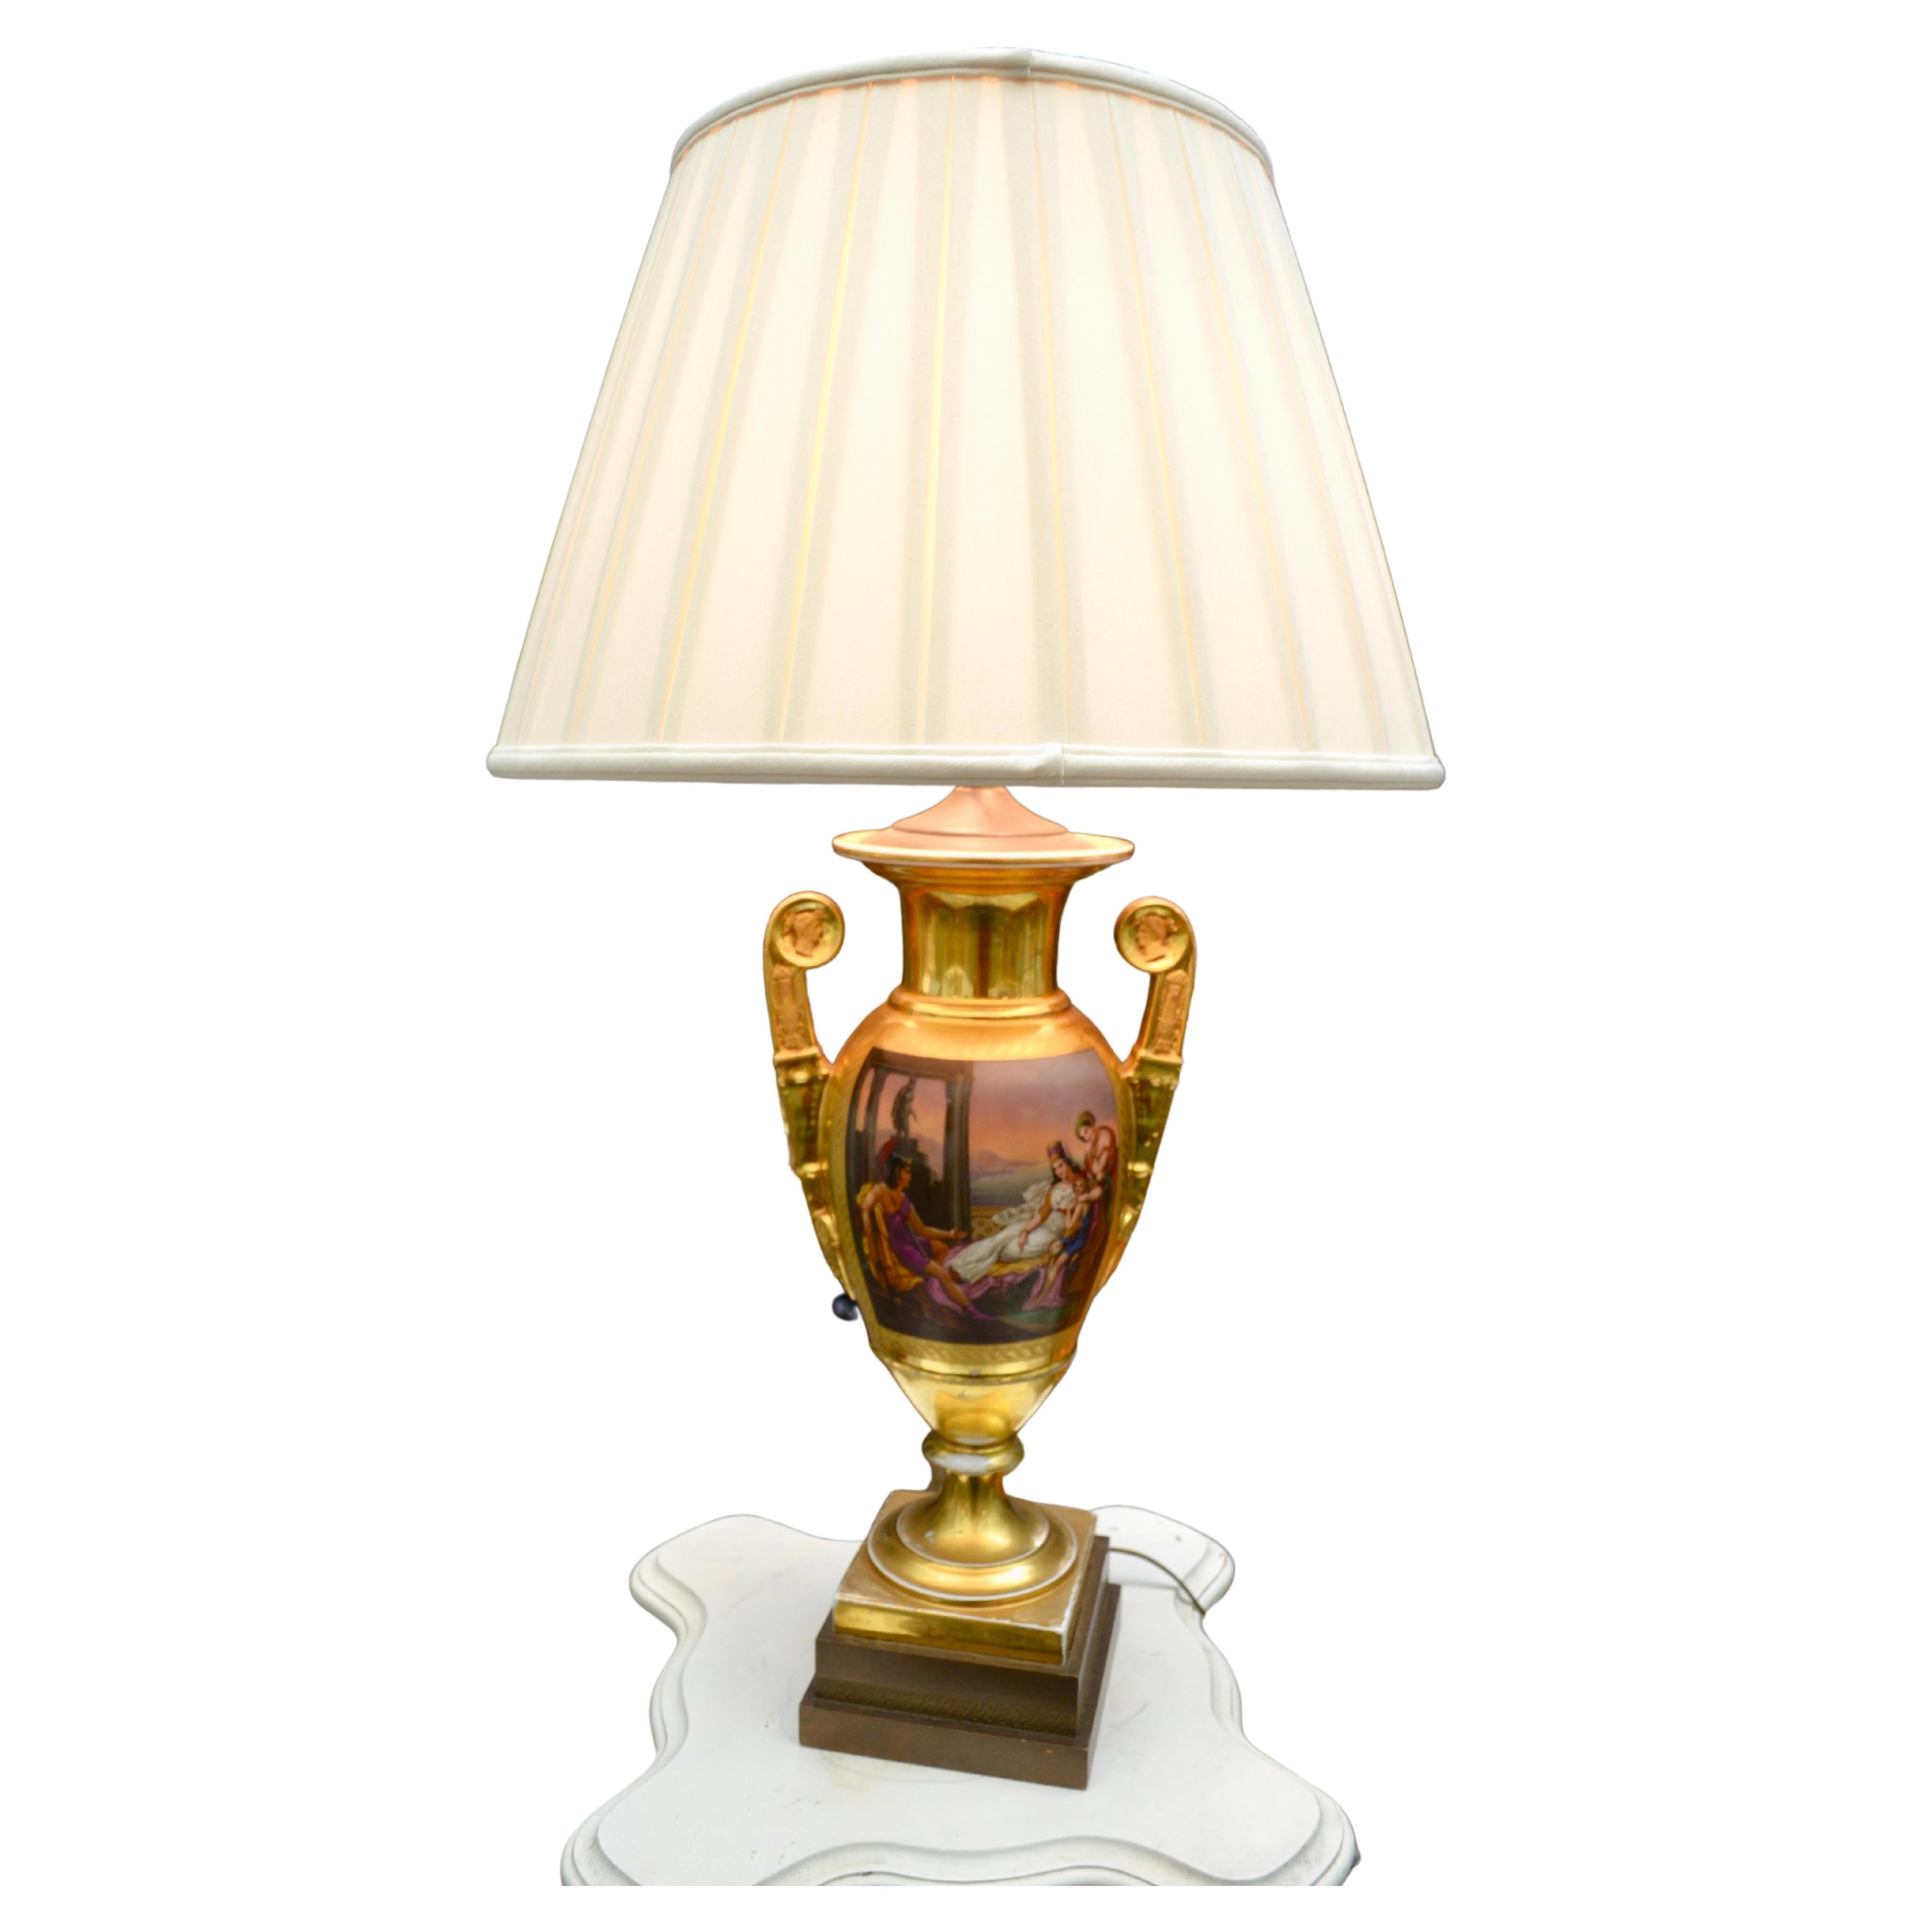 Beautiful Large Porcelain Ormolu Trophy Style Vase Table Lamp w Shade and Finial 